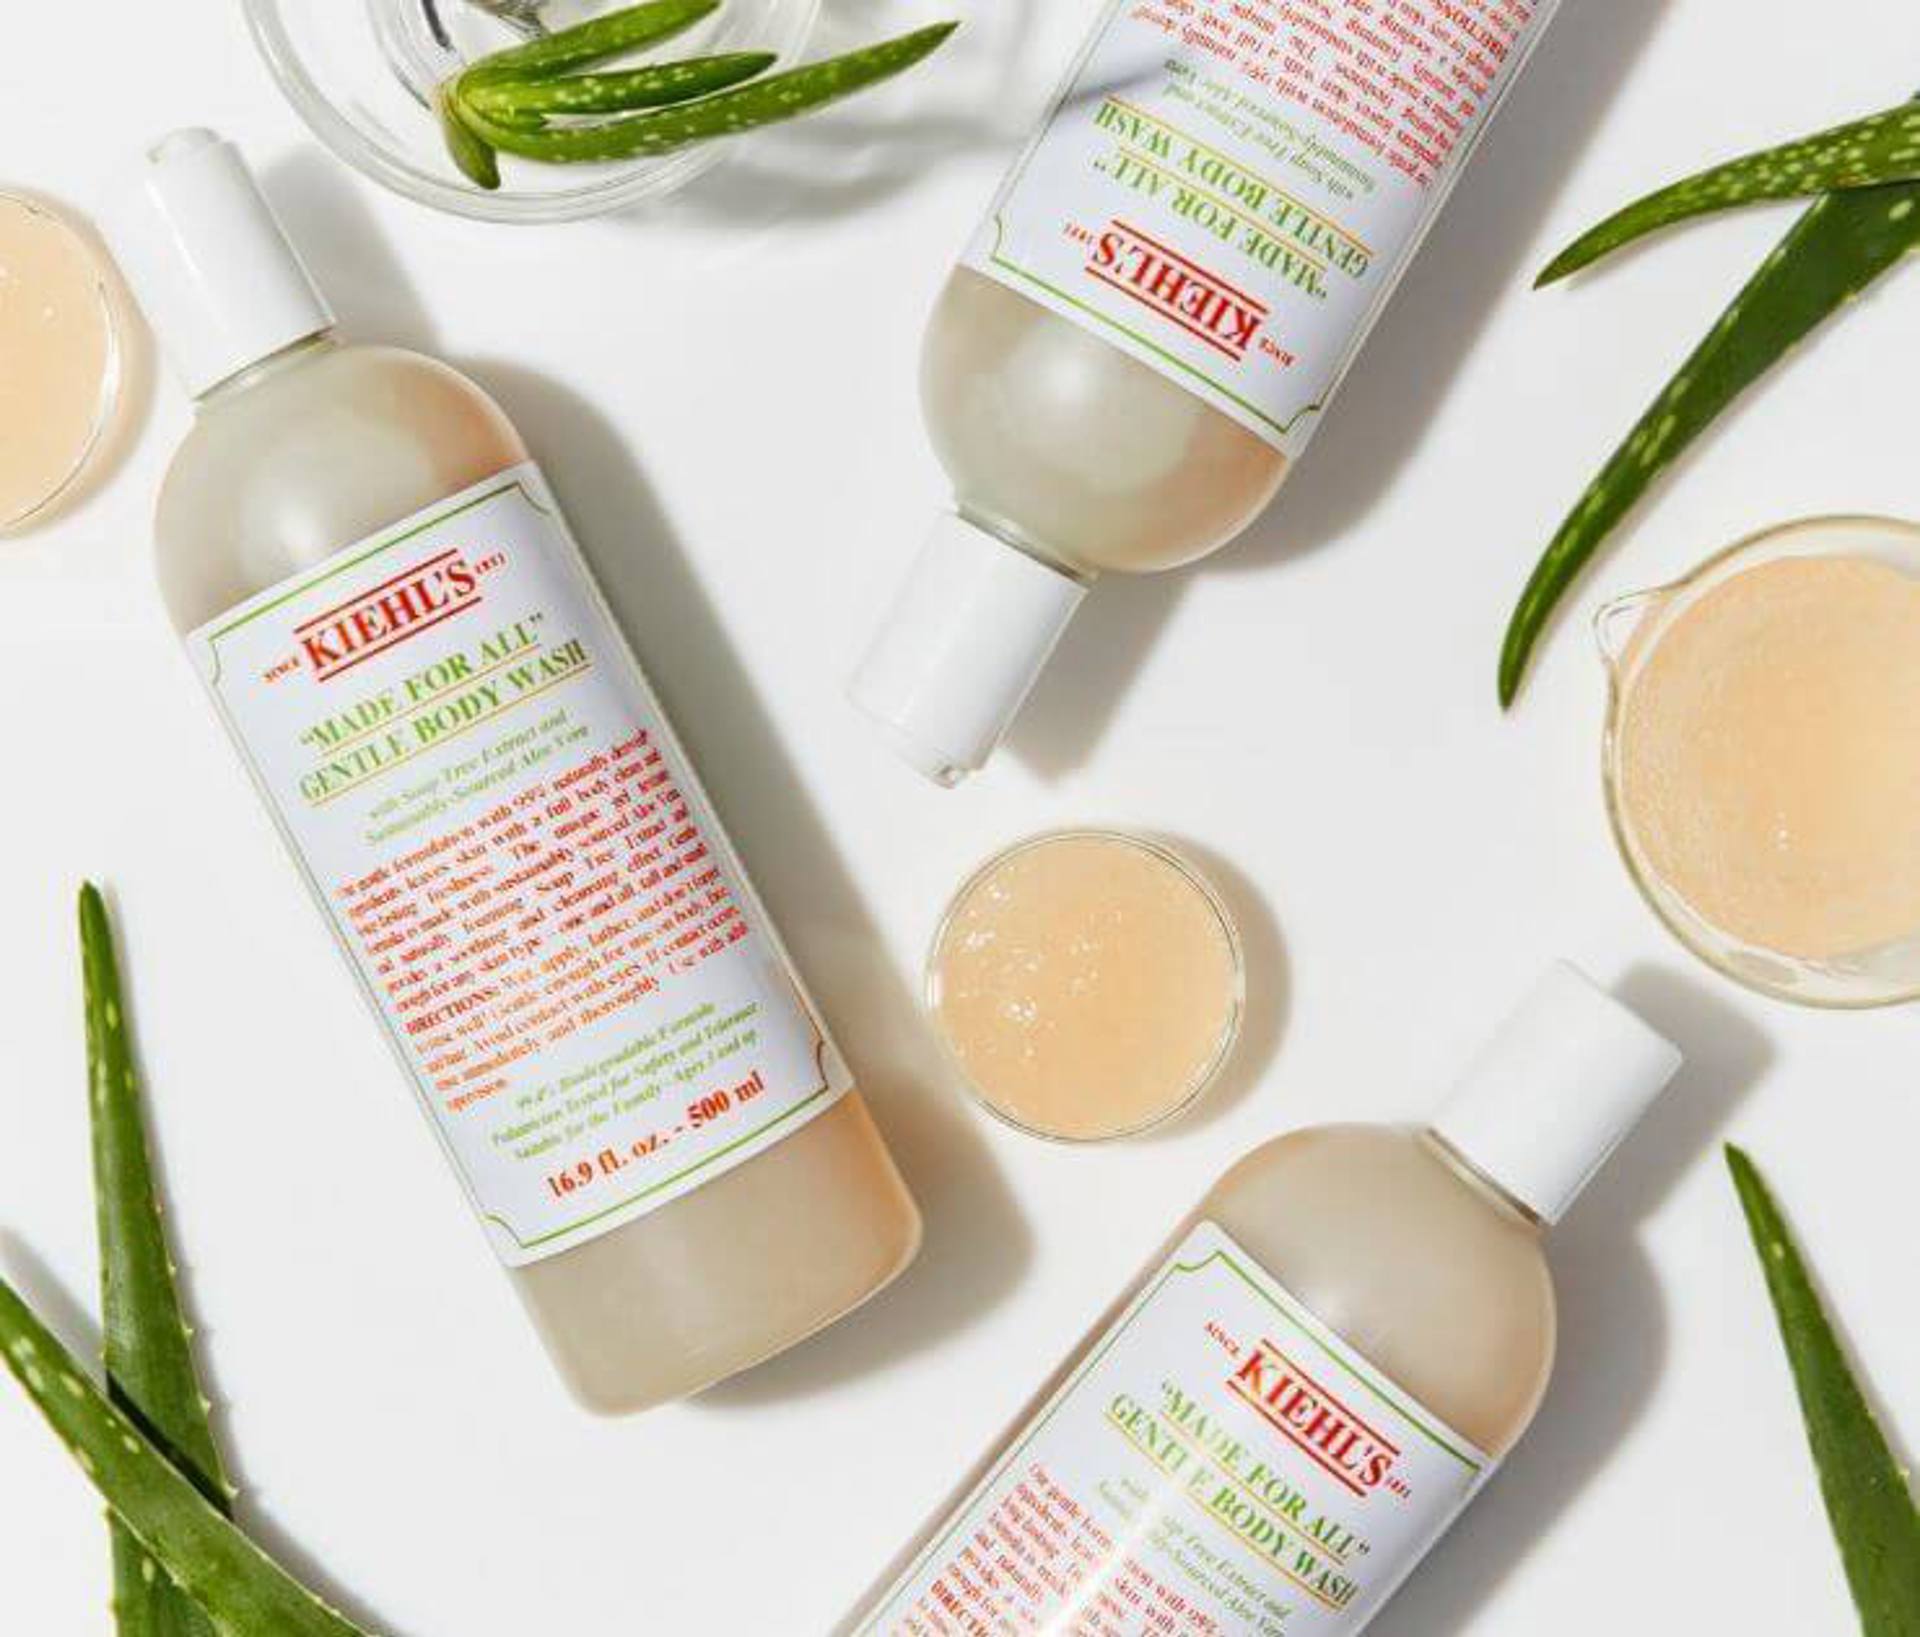 Kiehl’s Made For All Gentle Body Cleanser